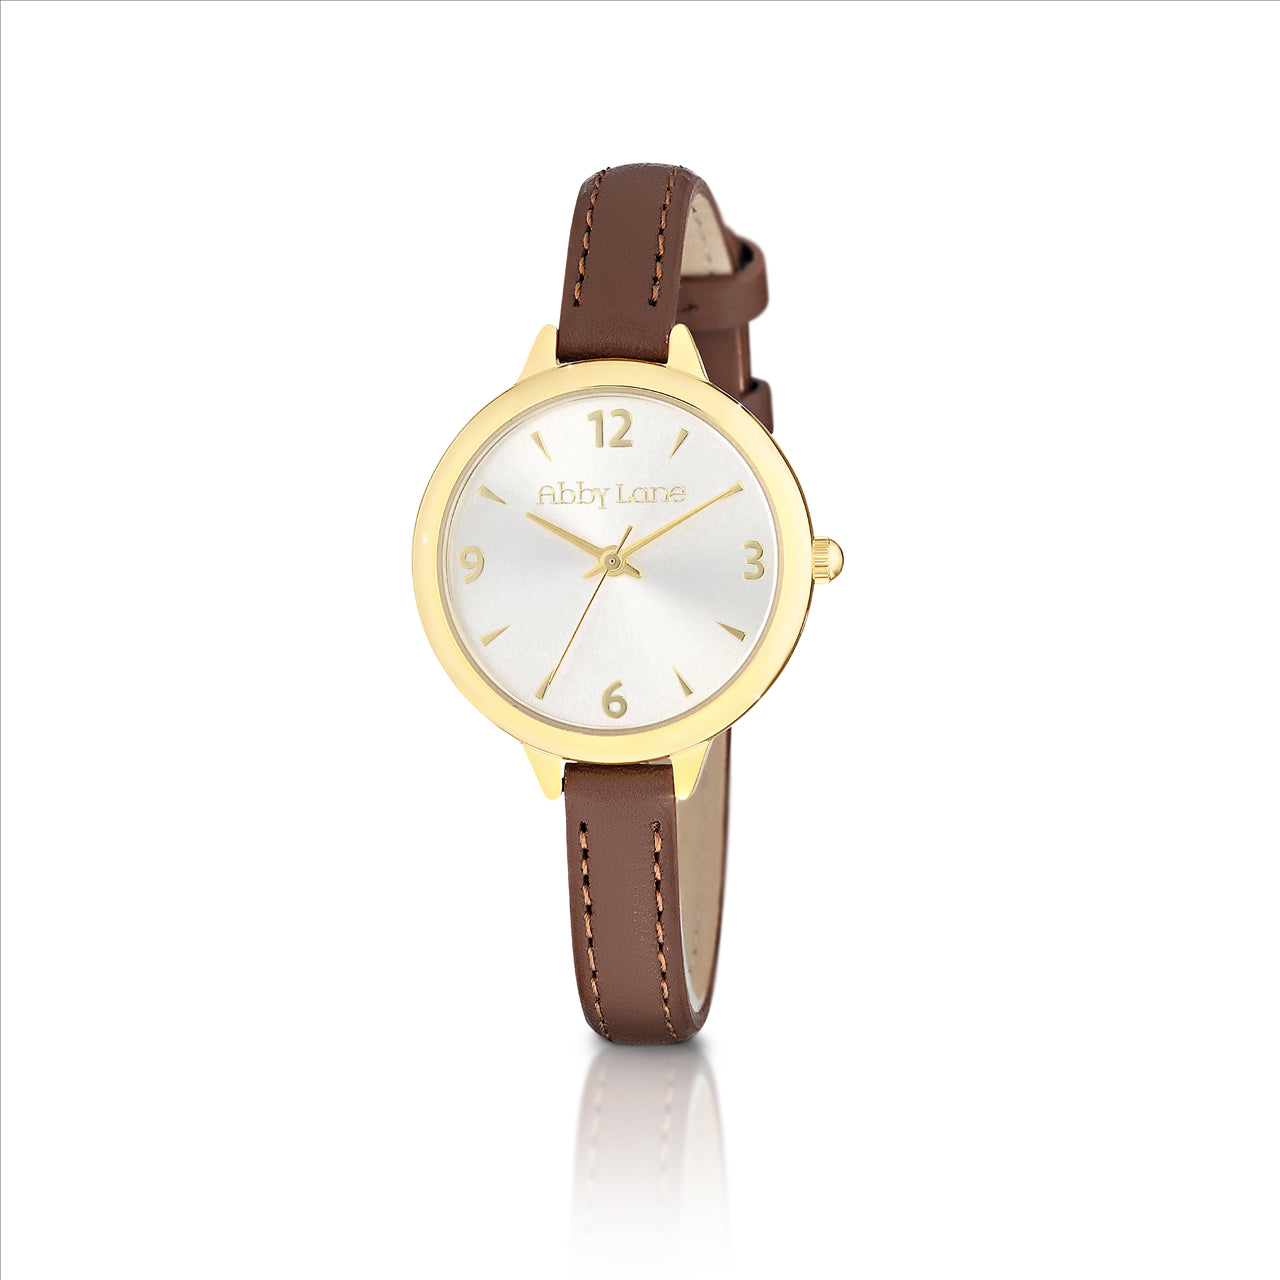 Abby lane charlotte goldtone case. silver dial with gold accents. tan leather strap -case size 29mm